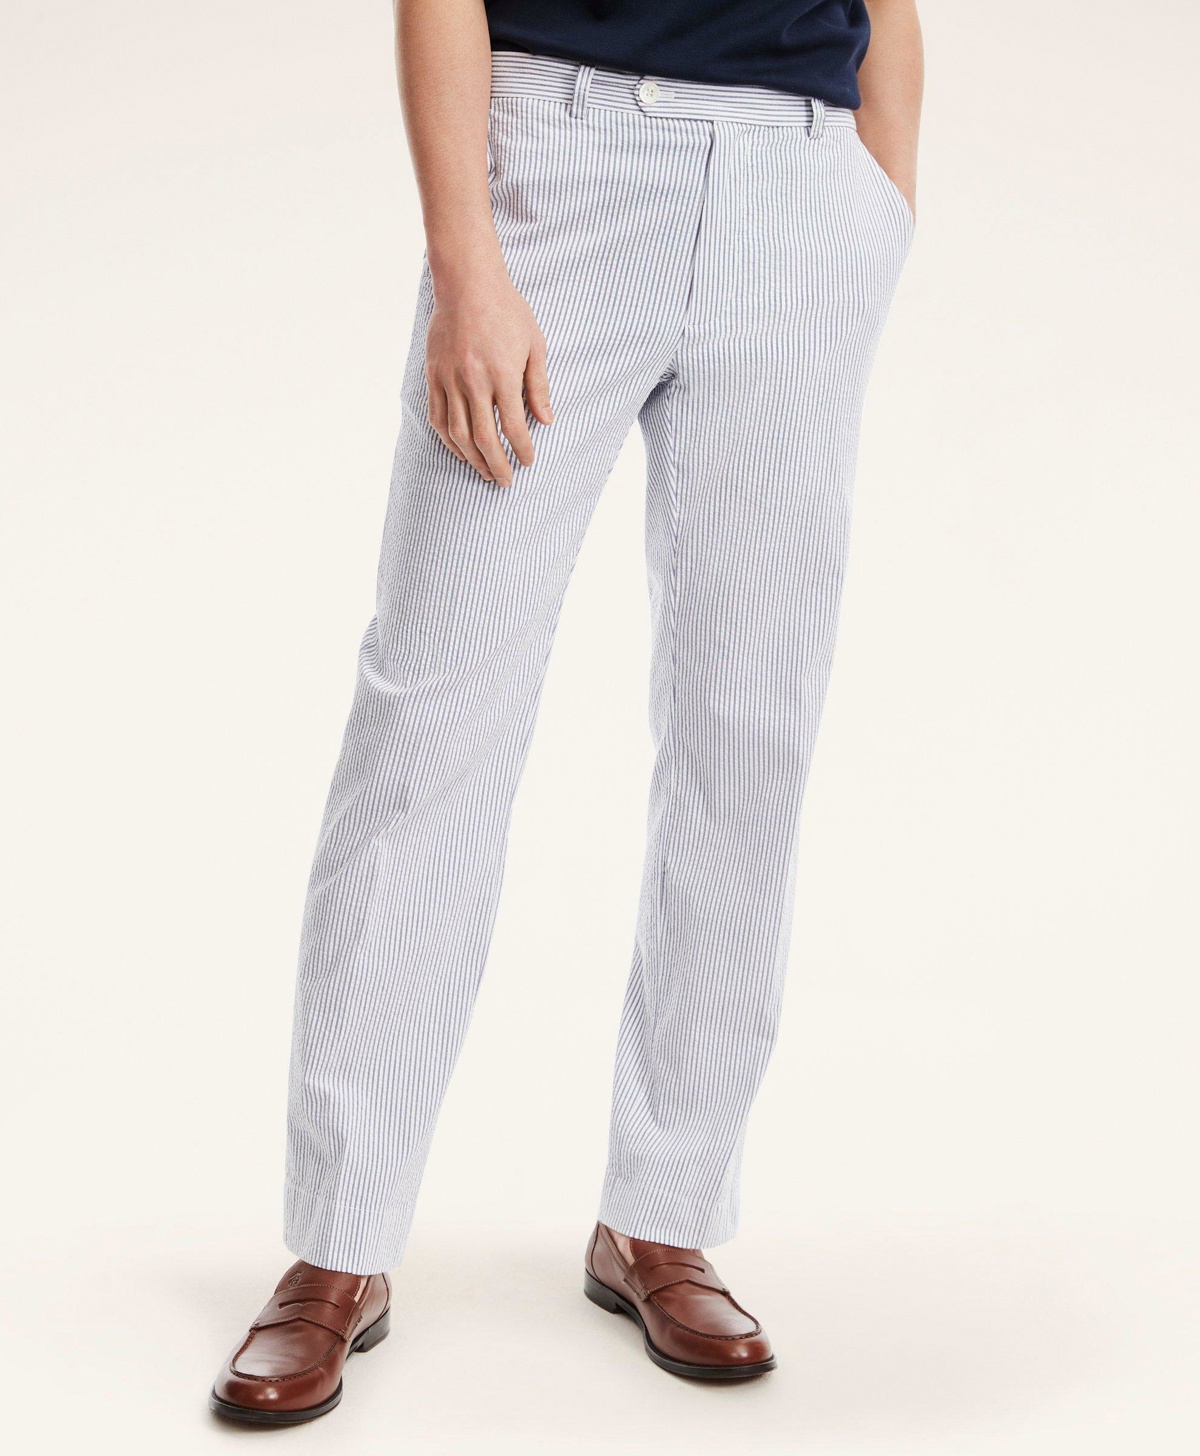 Brooks Brothers Madison Fit Plain Front Cotton Dress Trousers